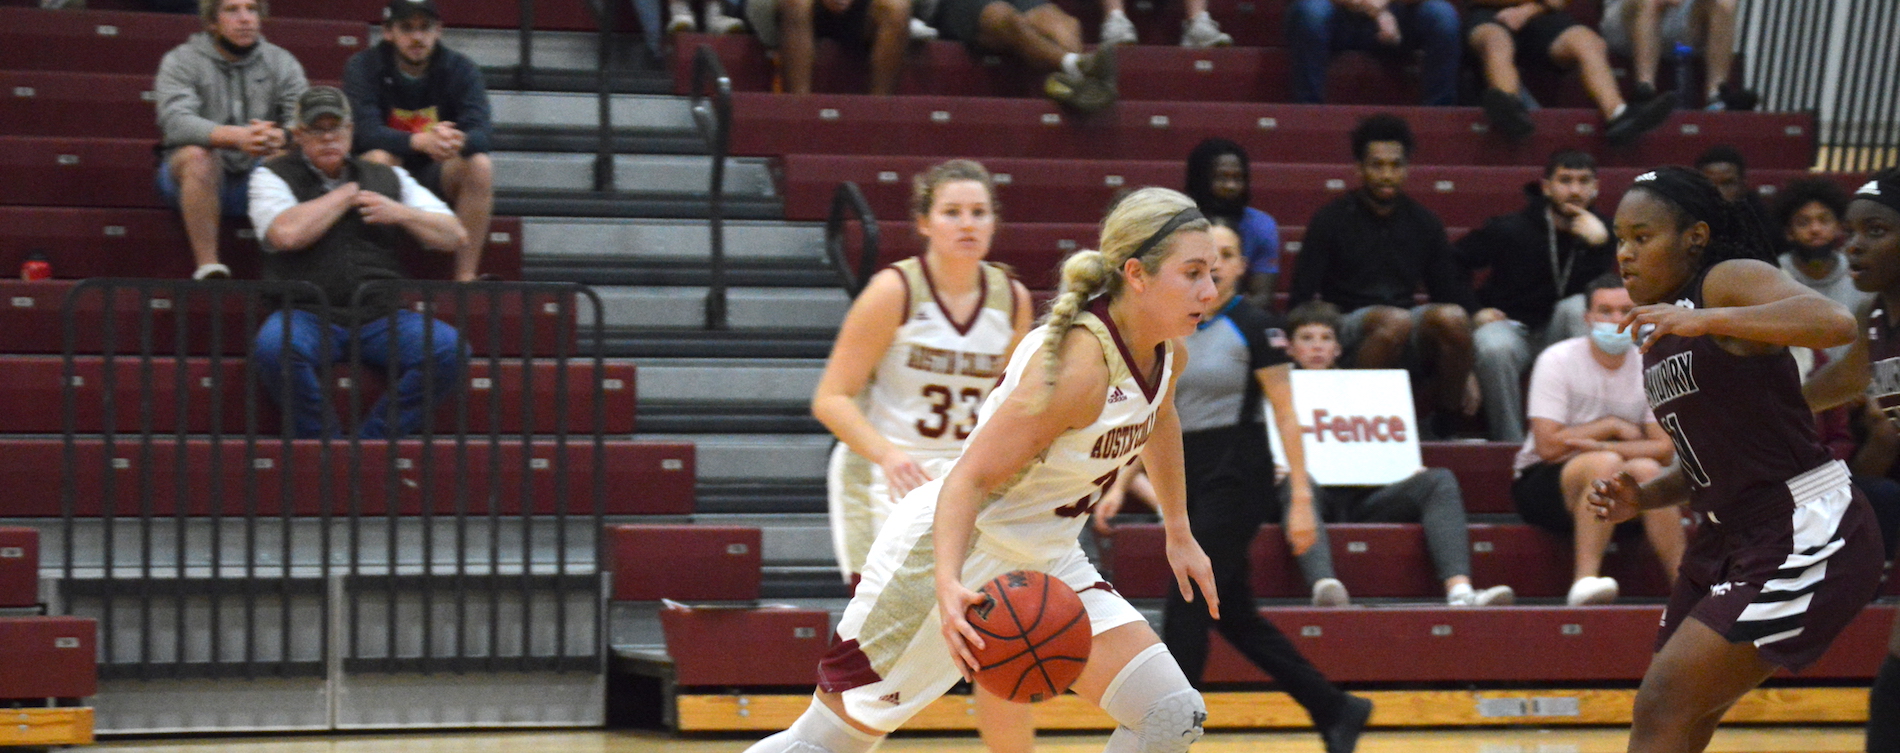 'Roos Hold Off McMurry for First Win